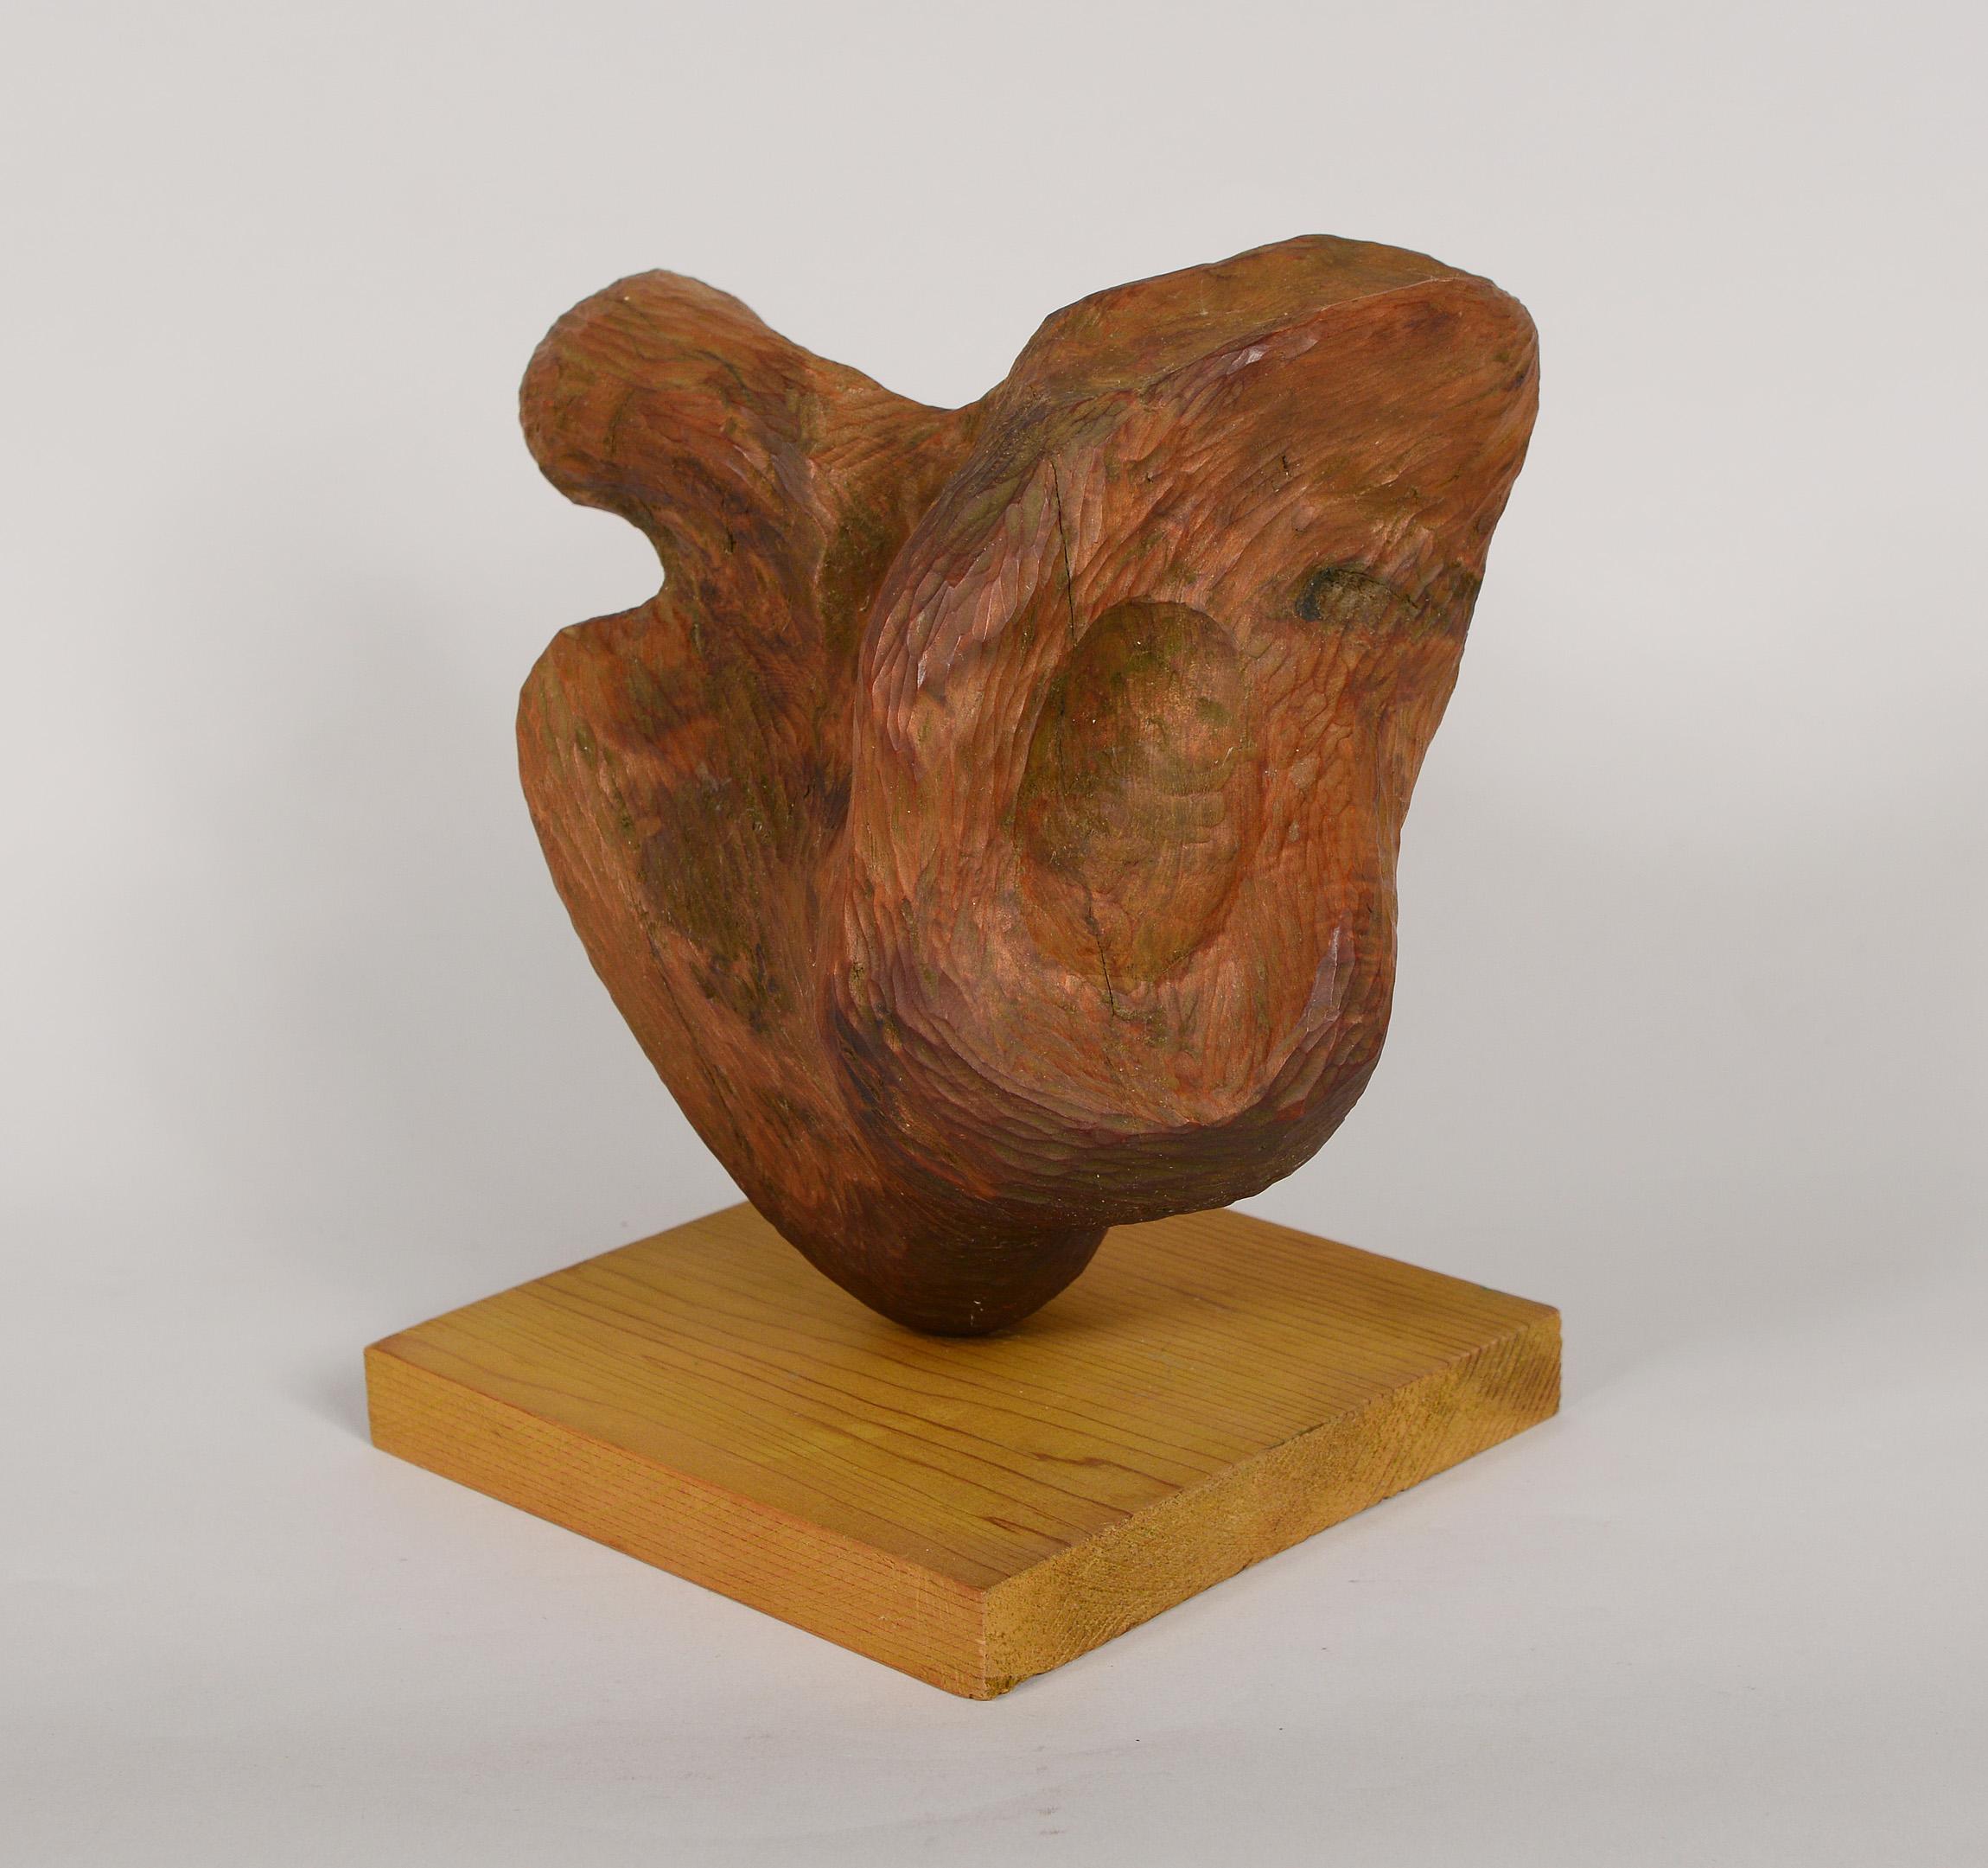 Small abstract carved wood sculpture. This was made by a geologist and professor as one of his hobbies.